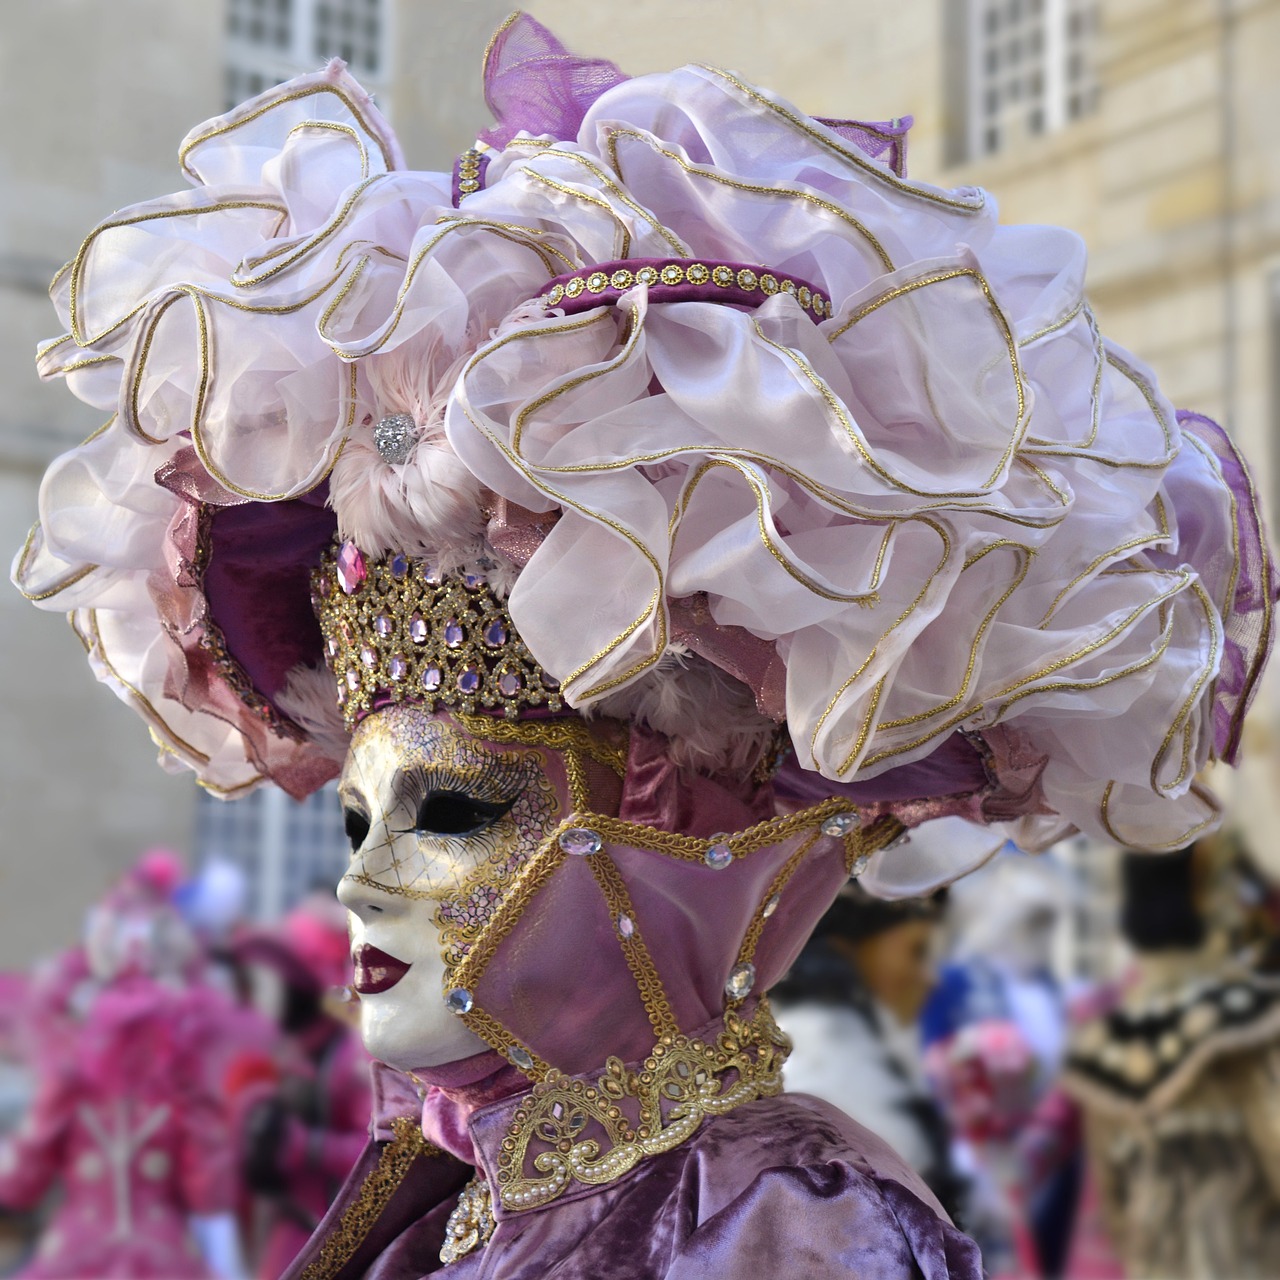 a close up of a person wearing a costume, by Robert Griffier, shutterstock, rococo, purple and pink, prize winning color photo, exquisite helmet detail, dressed in a beautiful